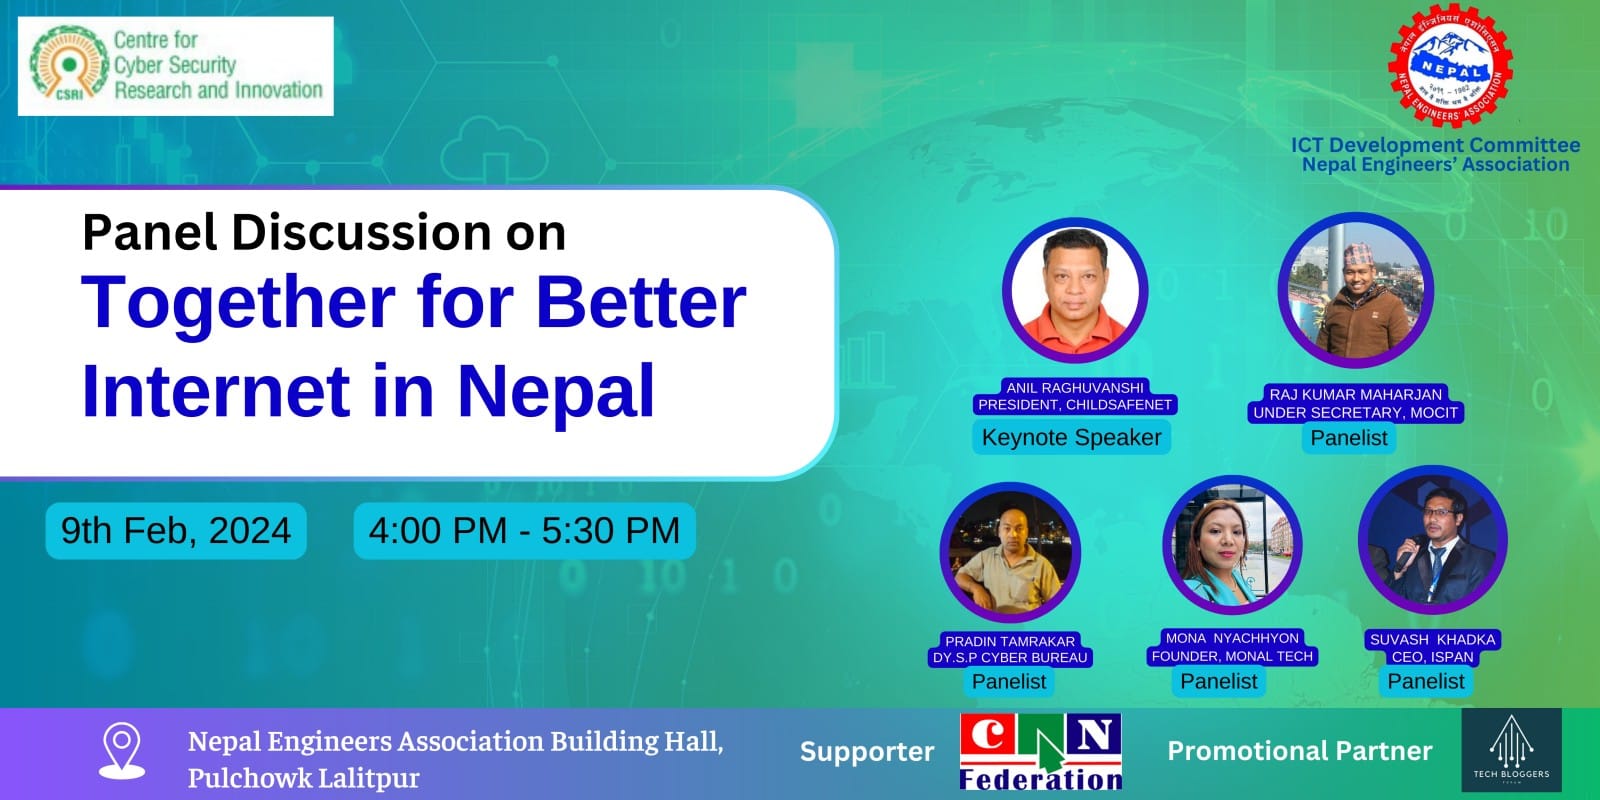 Together for a Better Internet for Nepal